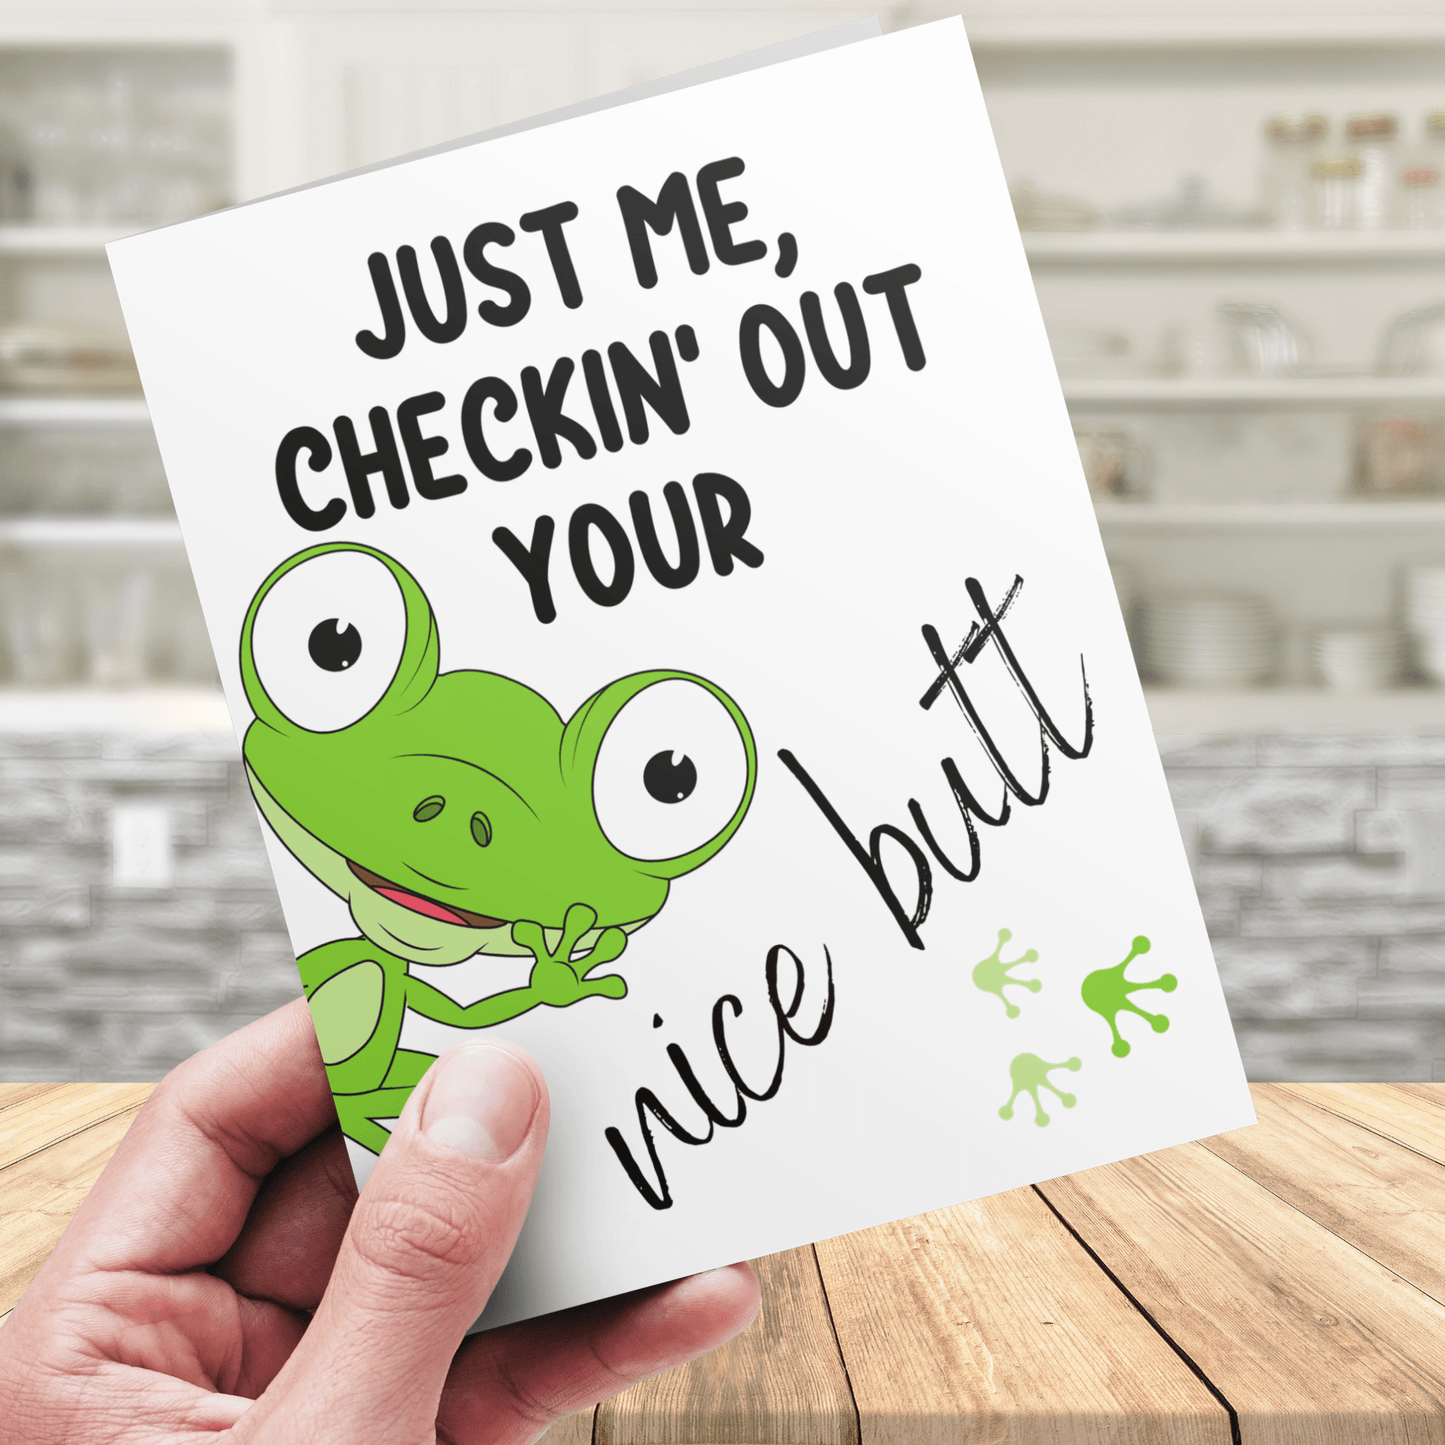 Couple Greeting Card: Just Me, Checkin' Out Your Butt...